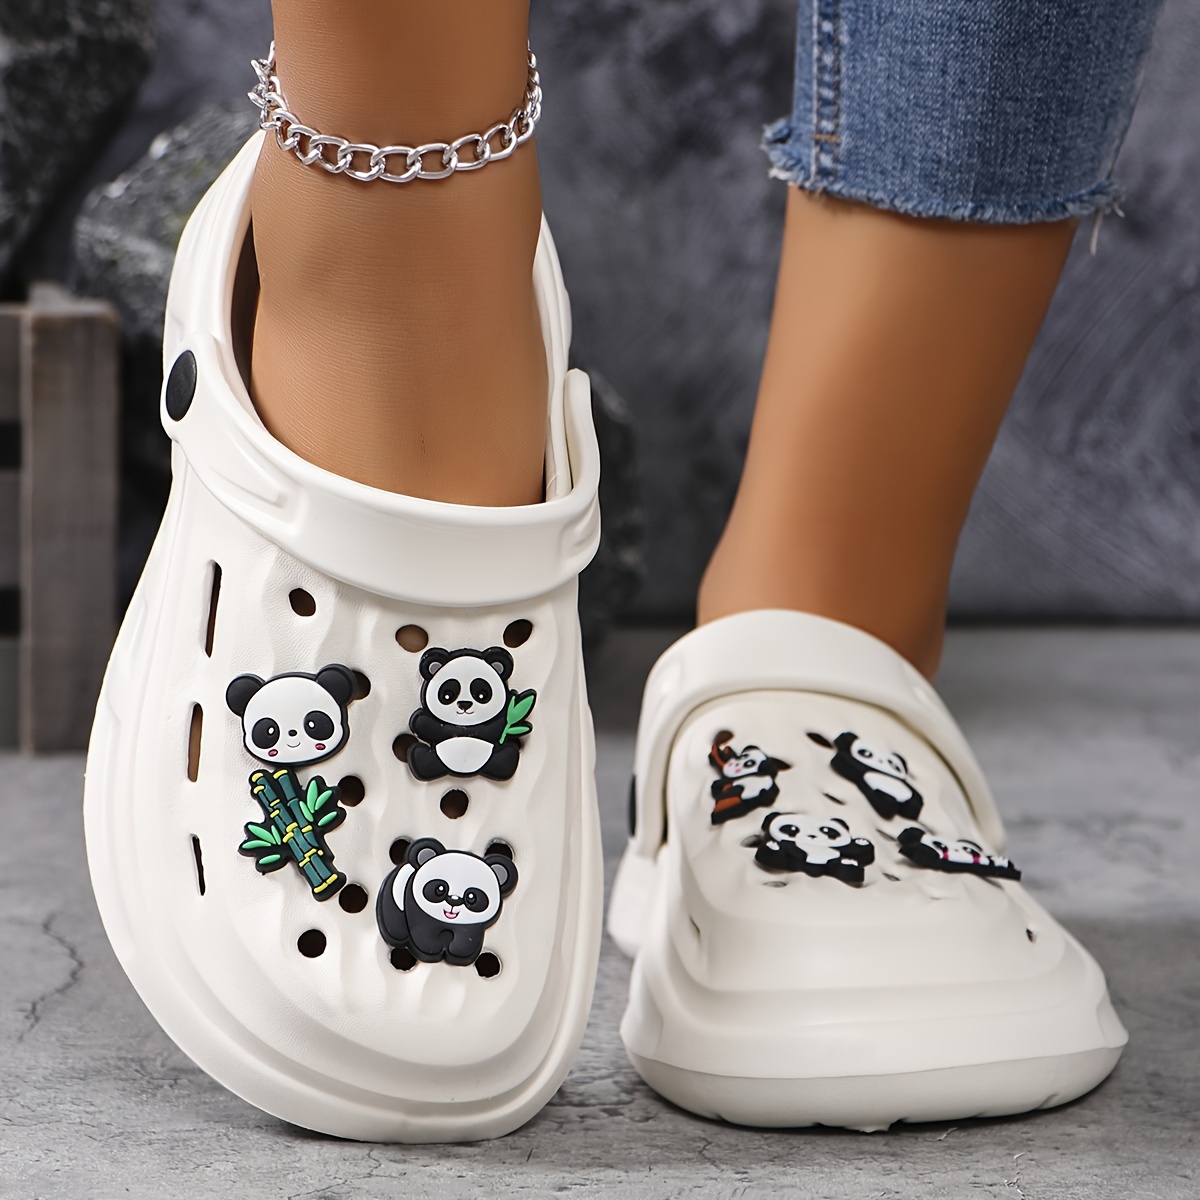 

Women's Cute Panda White Clogs, Breathable Foam Sandals With Charm Decorations, Casual Slip-on Summer Shoes